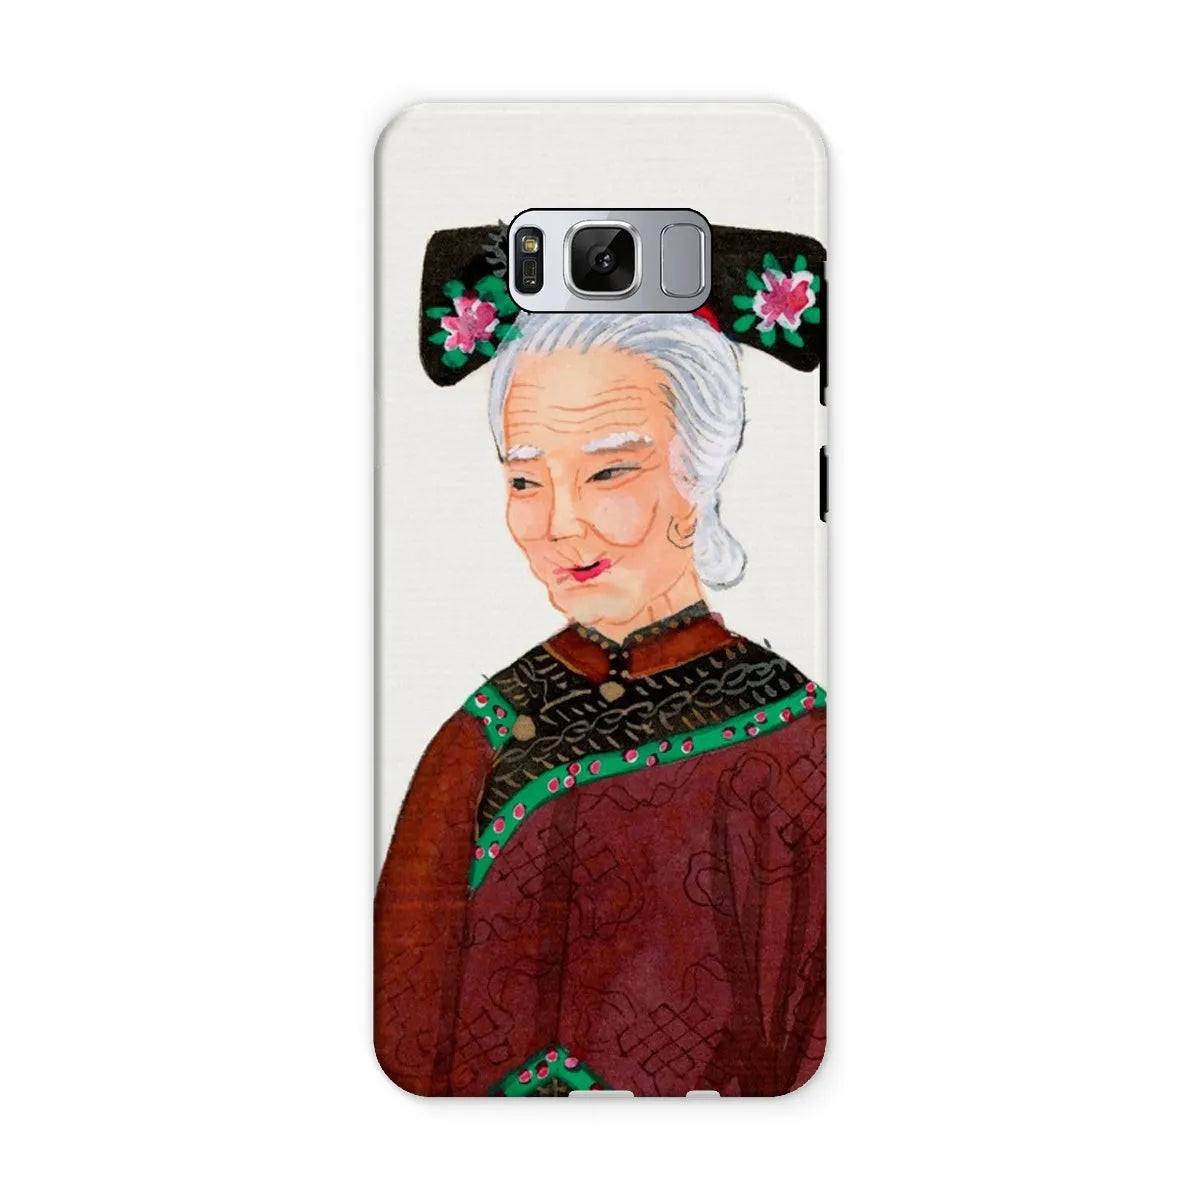 Grand Dame Too - Aesthetic Chinese Art Phone Case - Samsung Galaxy S8 / Matte - Mobile Phone Cases - Aesthetic Art